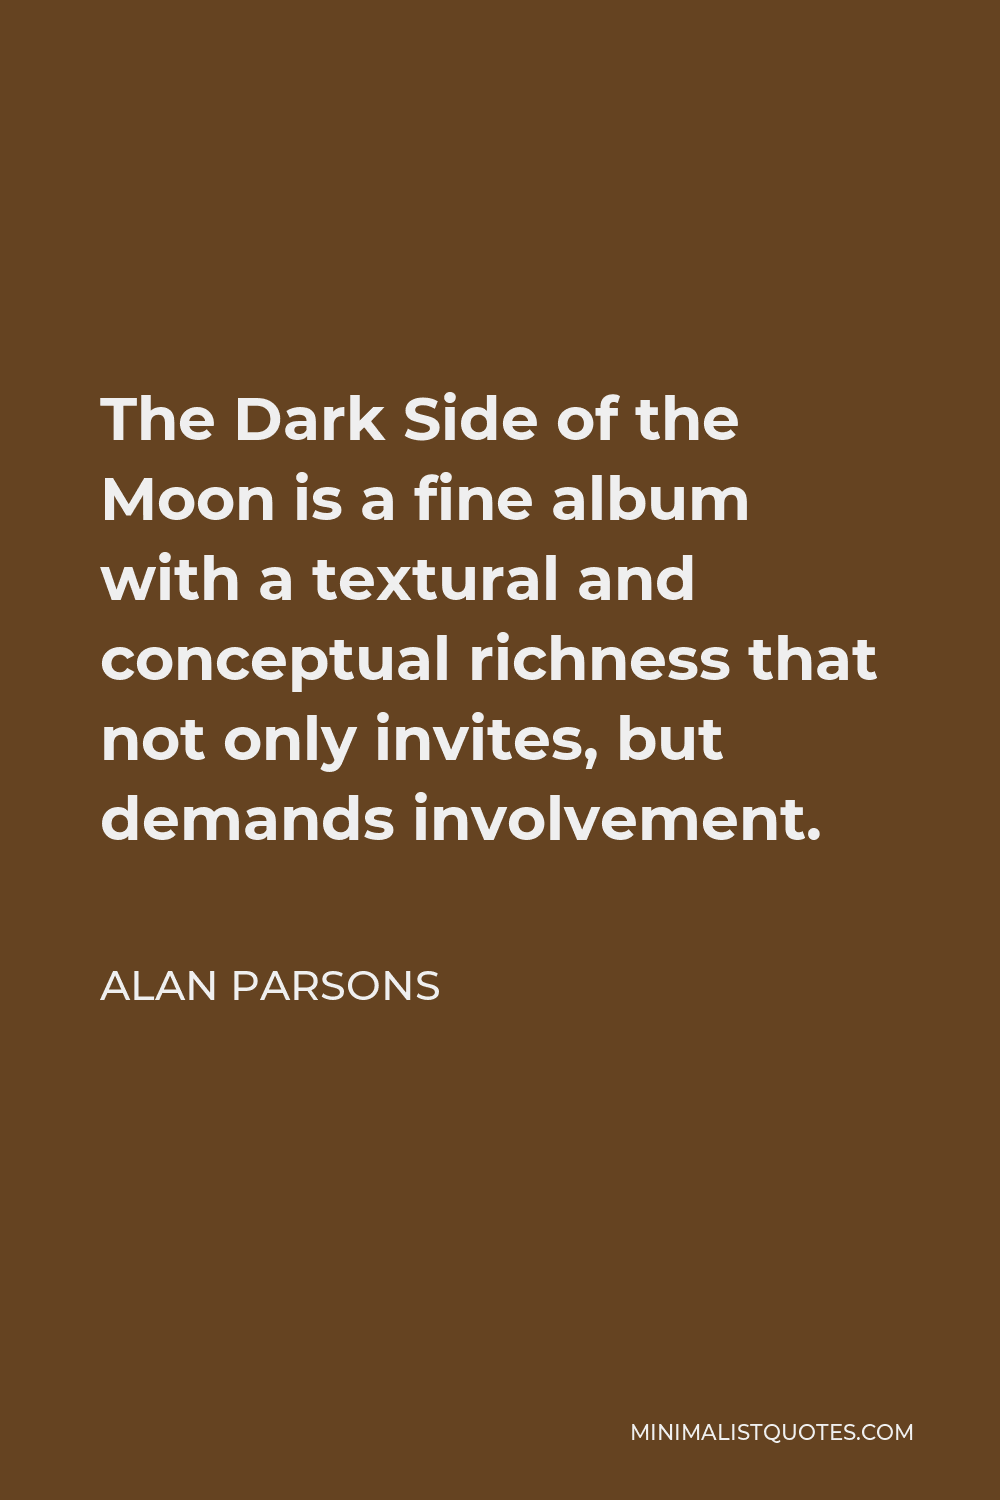 Alan Parsons Quote - The Dark Side of the Moon is a fine album with a textural and conceptual richness that not only invites, but demands involvement.